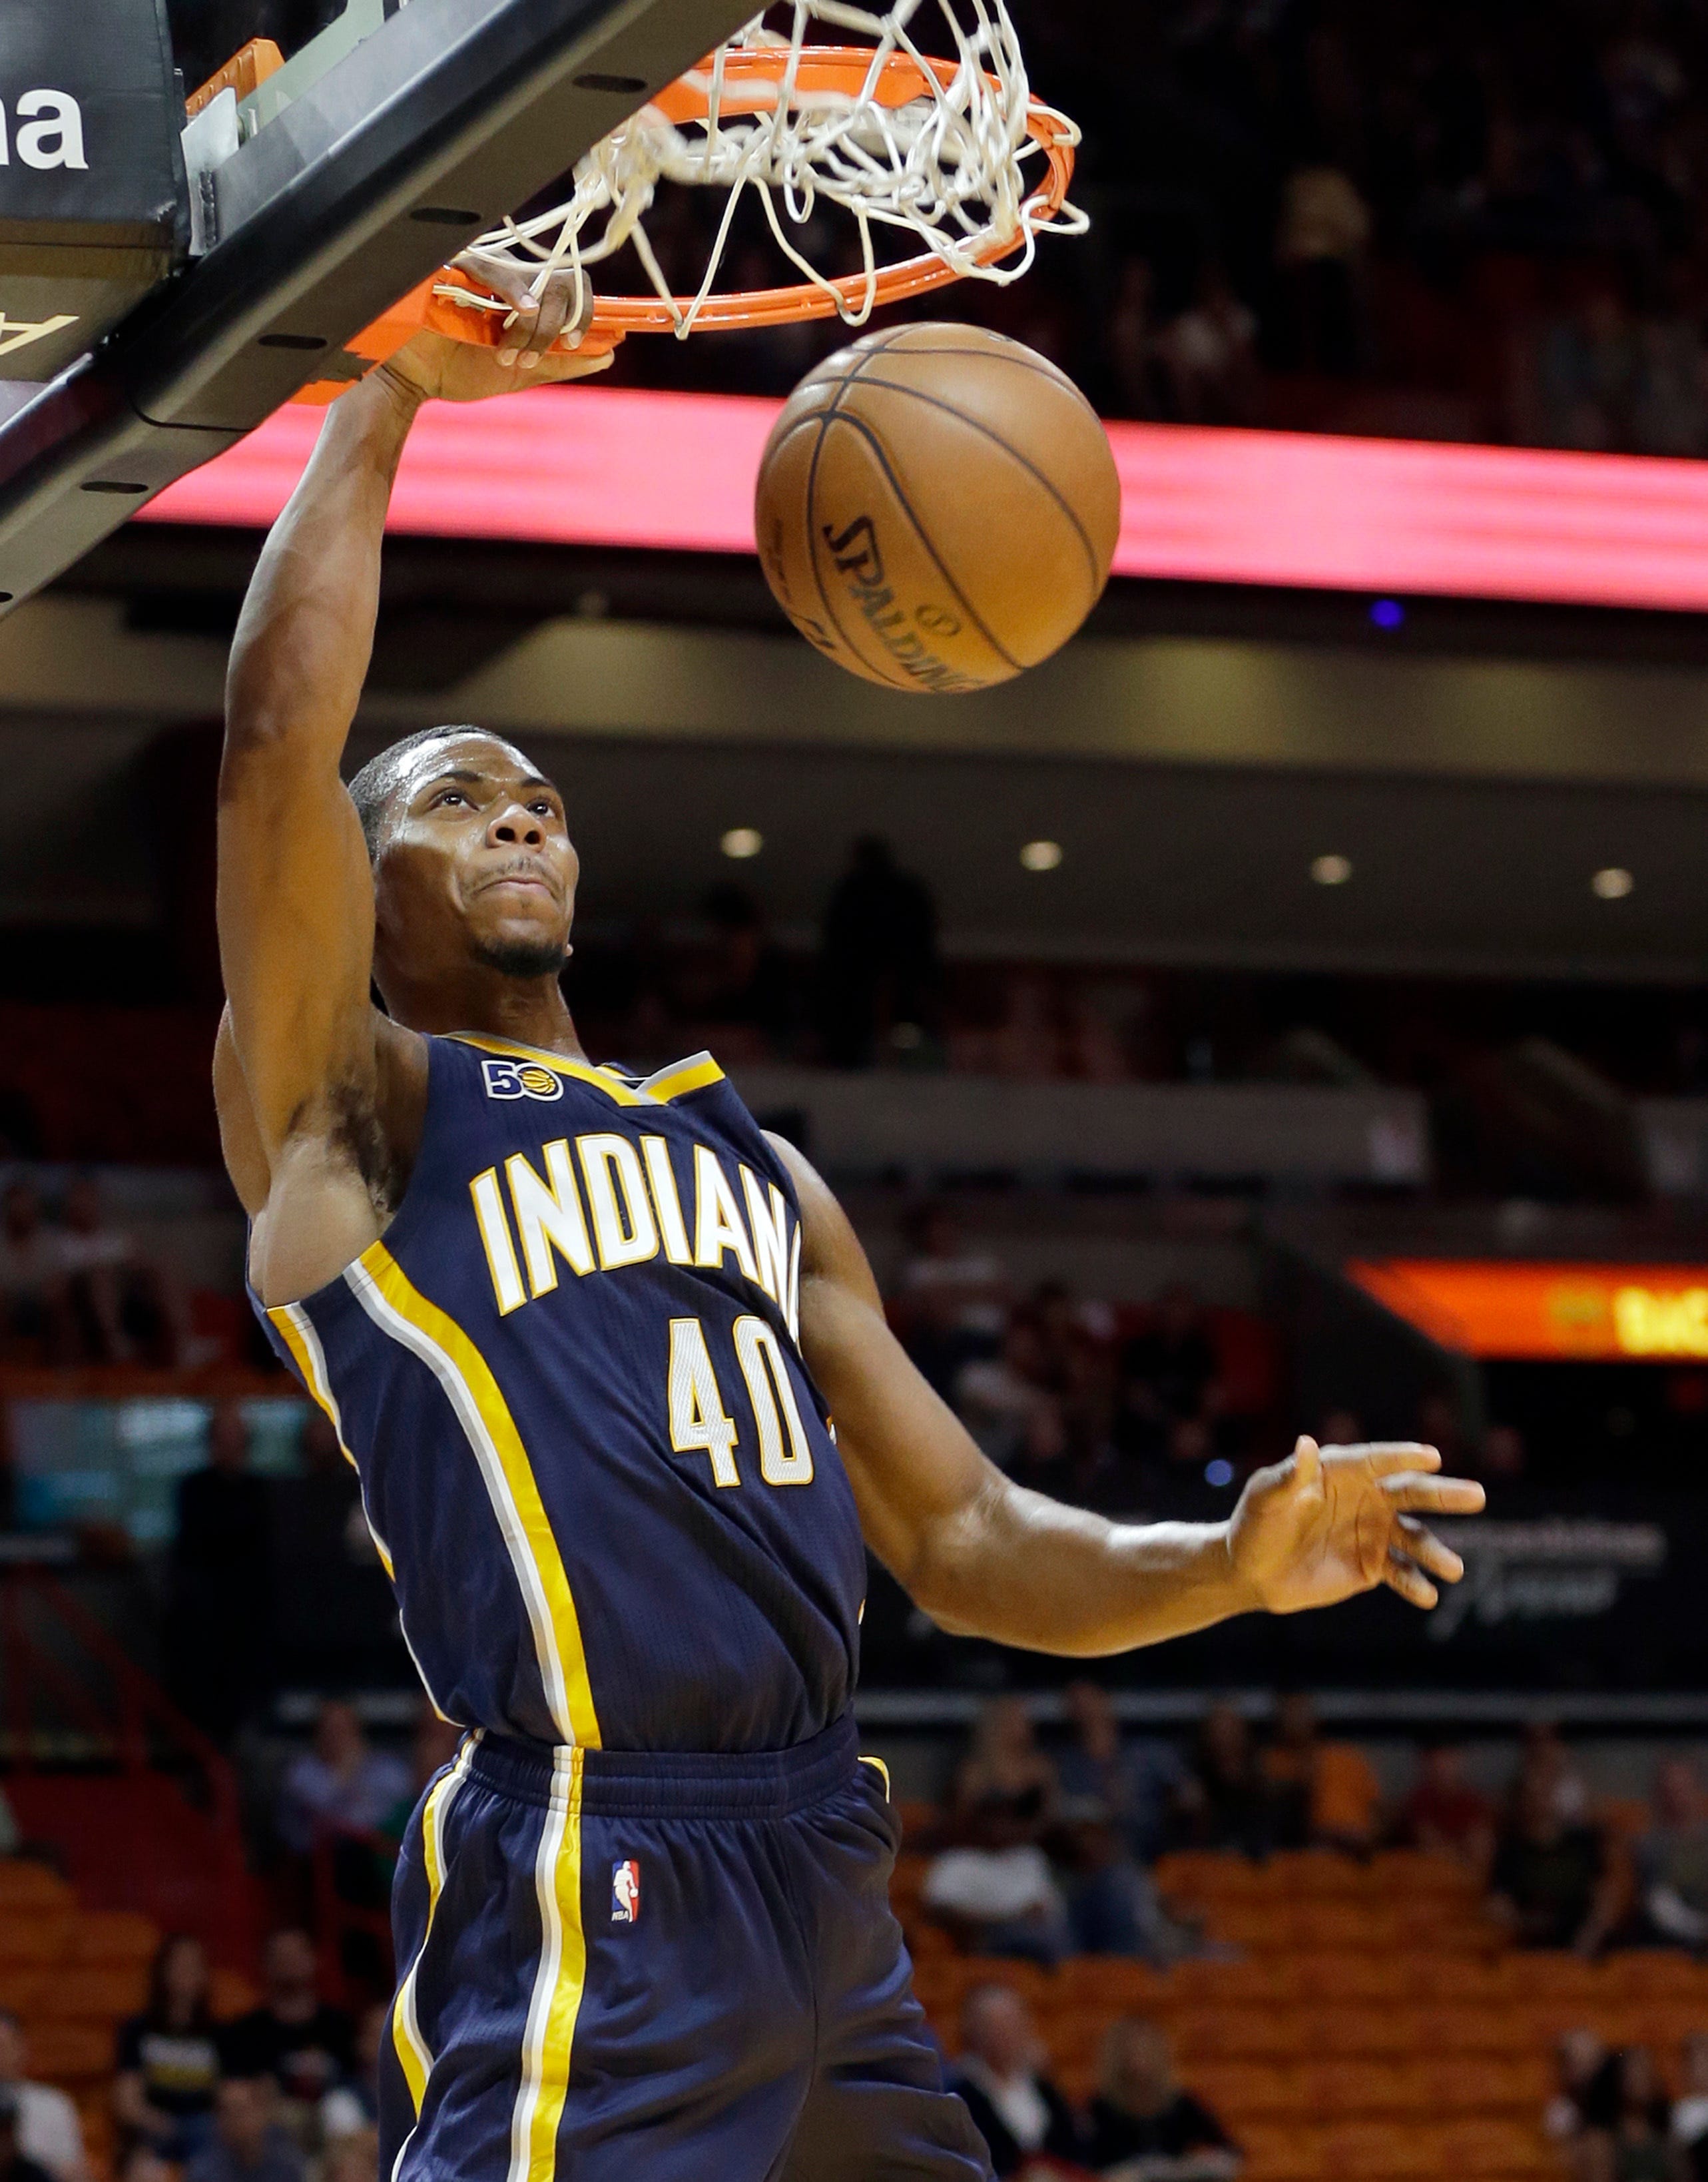 6. Glenn Robinson III, G/F: If Stanley Johnson doesn’t pan out, Robinson is a potential improvement at small forward, with excellent 3-point shooting (41 percent) and good overall size and athleticism — for a smaller contract. The former Michigan standout could compete for the starting role and end up filling the gap if Johnson is traded or goes elsewhere in free agency next summer.